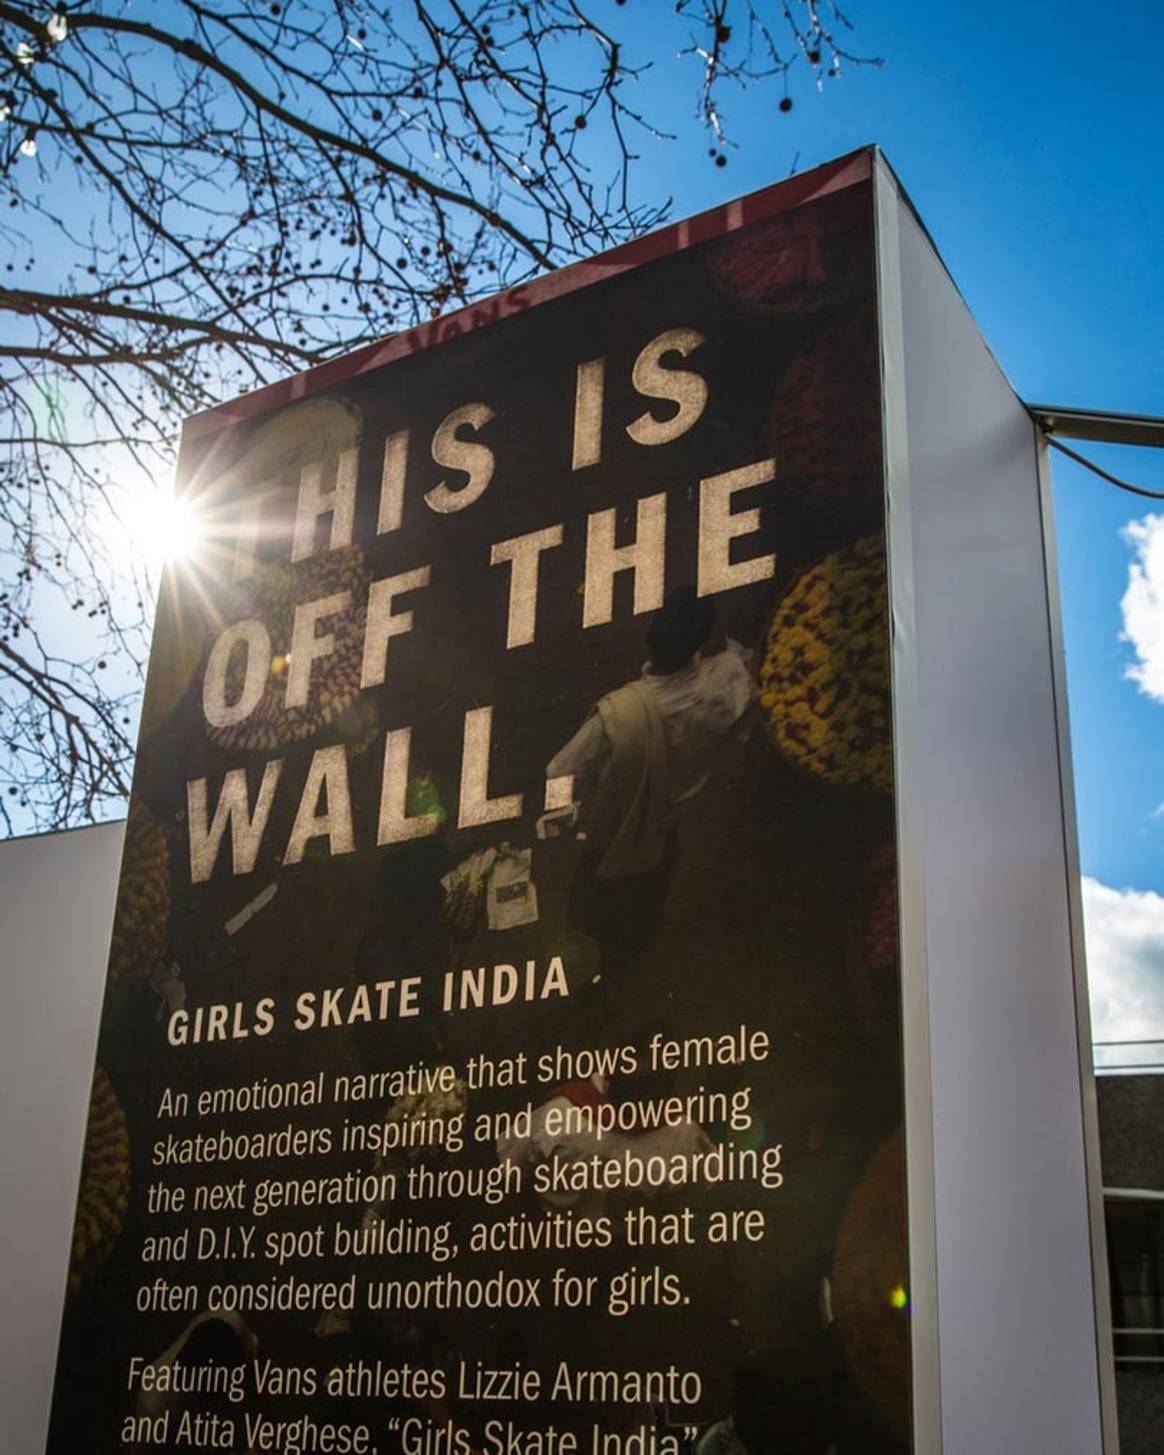 Vans unveils 'This is Off The Wall' campaign installation at Southbank, London